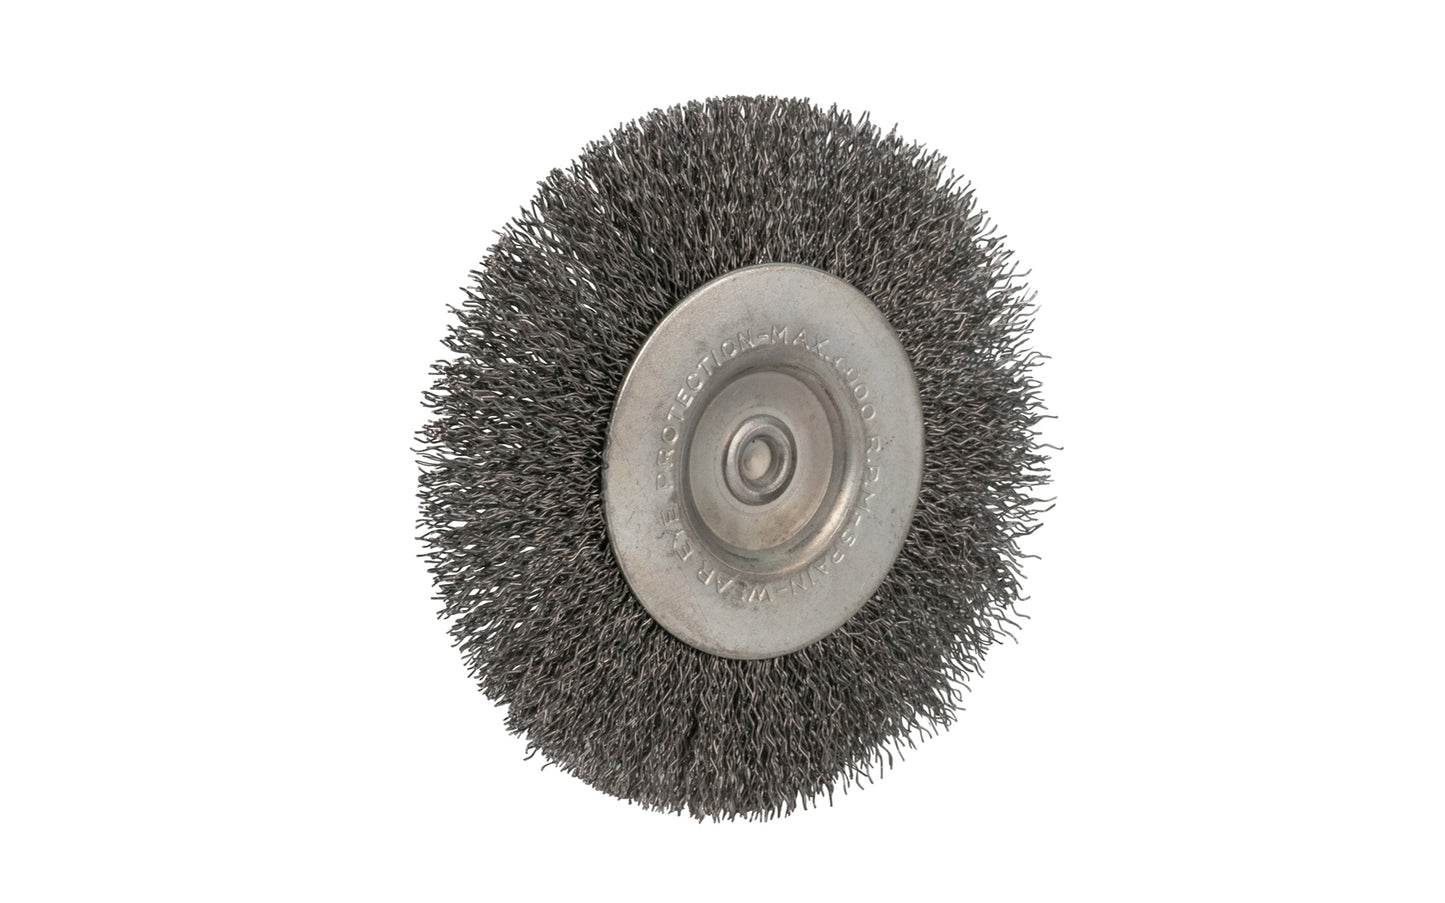 Alfa Tools 3" Fine Wire Wheel - 1/4" Shank. 0.008" Wire Diameter. 6000 RPM max. All-steel construction. Applications include deburring, blending, removal of rust, scale, dirt, & finish preparation prior to painting or plating. Made by Alfa Tools.